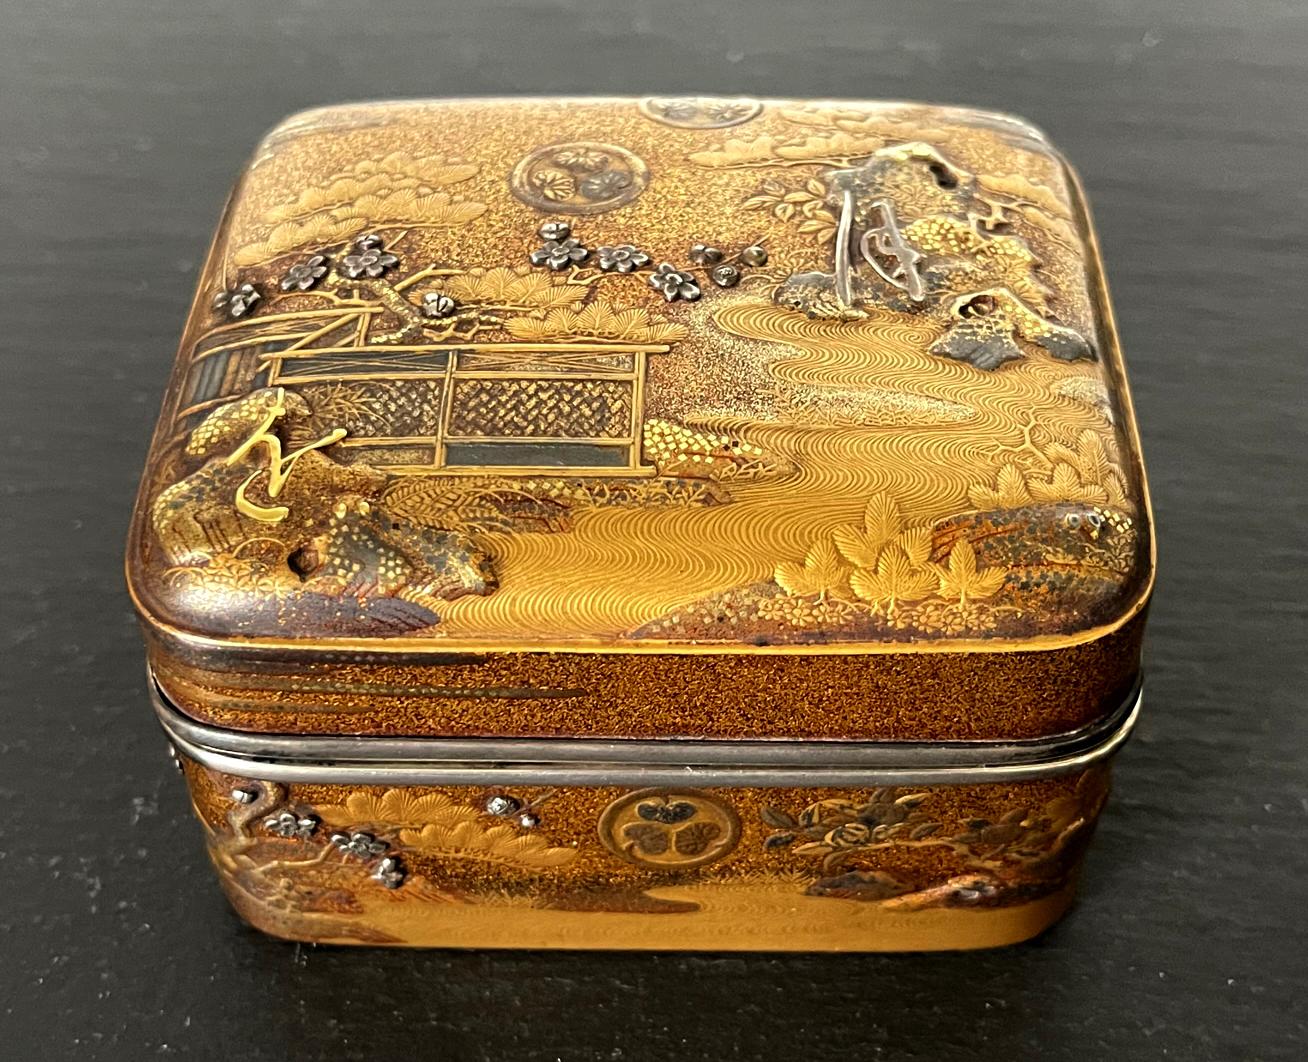 A small but intricately decorated Japanese lacquer box Kobako from Edo period circa 18th century with possible lineage traced to Kishu Tokugawa family. The box was likely used to contain incense powder based on its size and shape. The rectangular